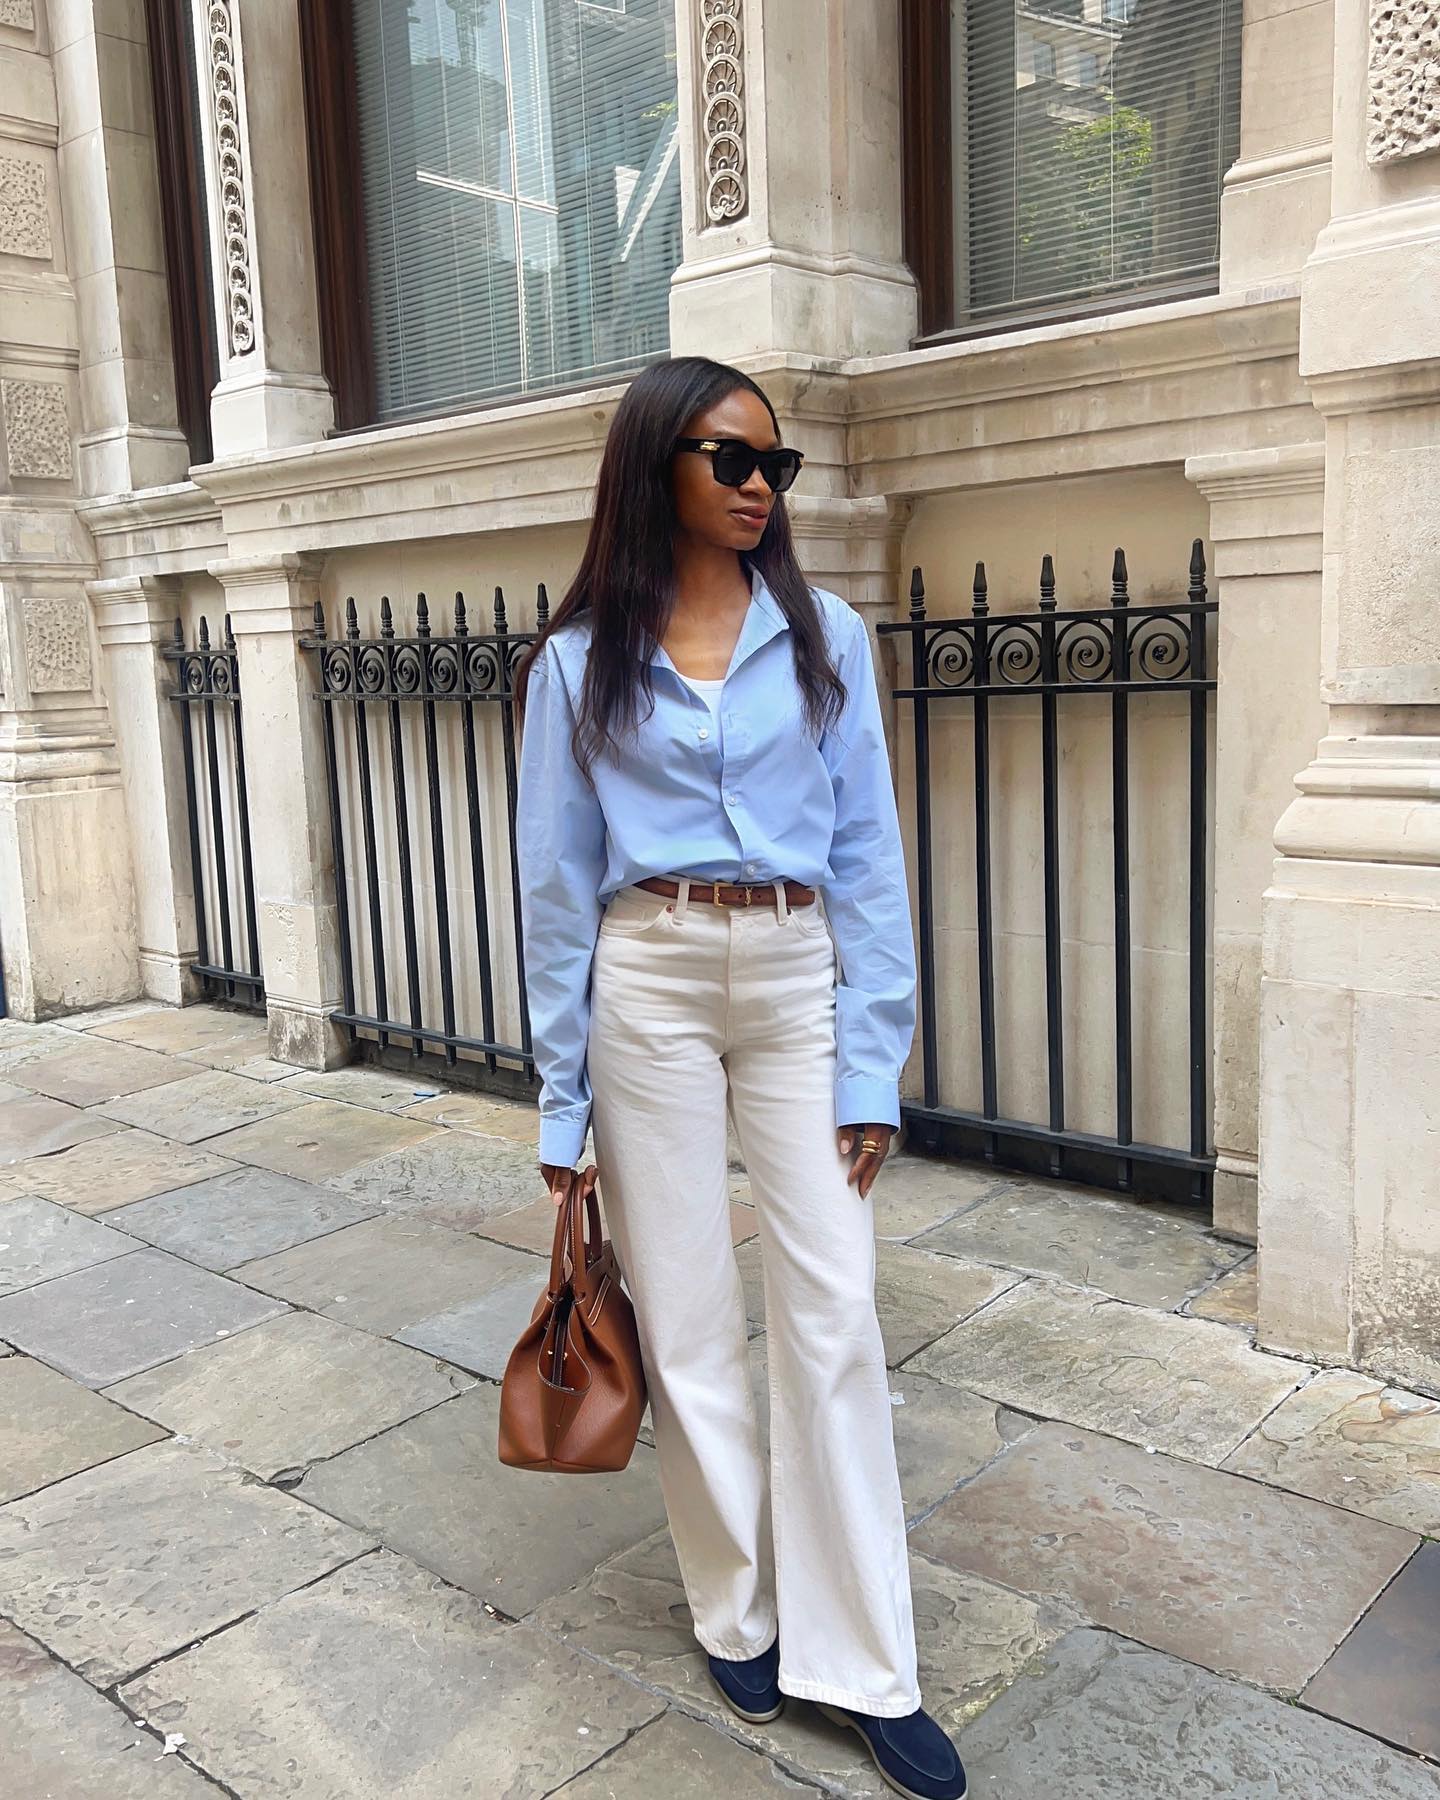 Influencer styles a blue shirt with cream trousers.